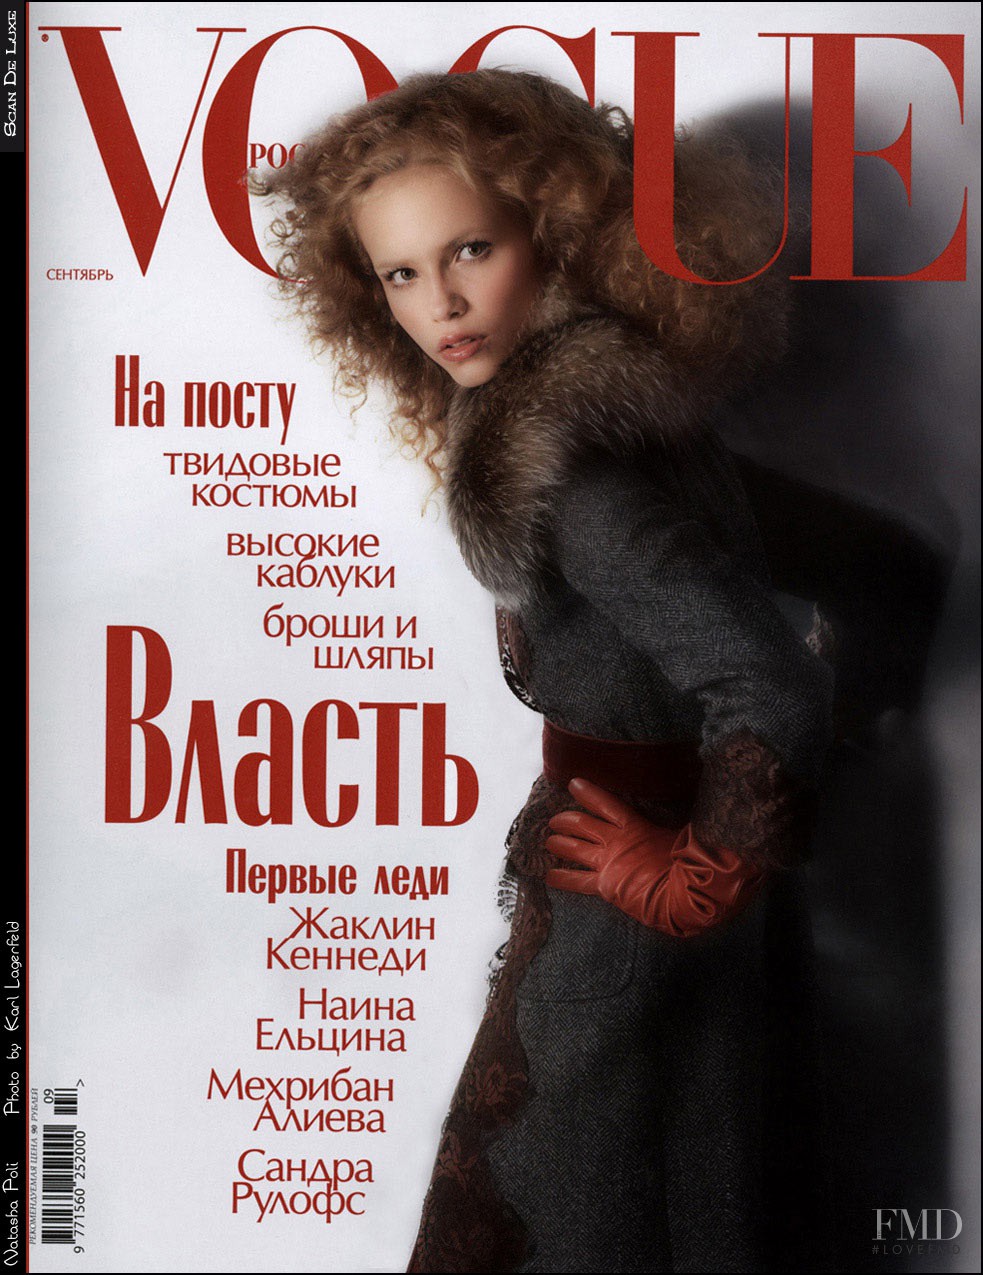 Cover of Vogue Russia with Natasha Poly, September 2004 (ID:10001 ...